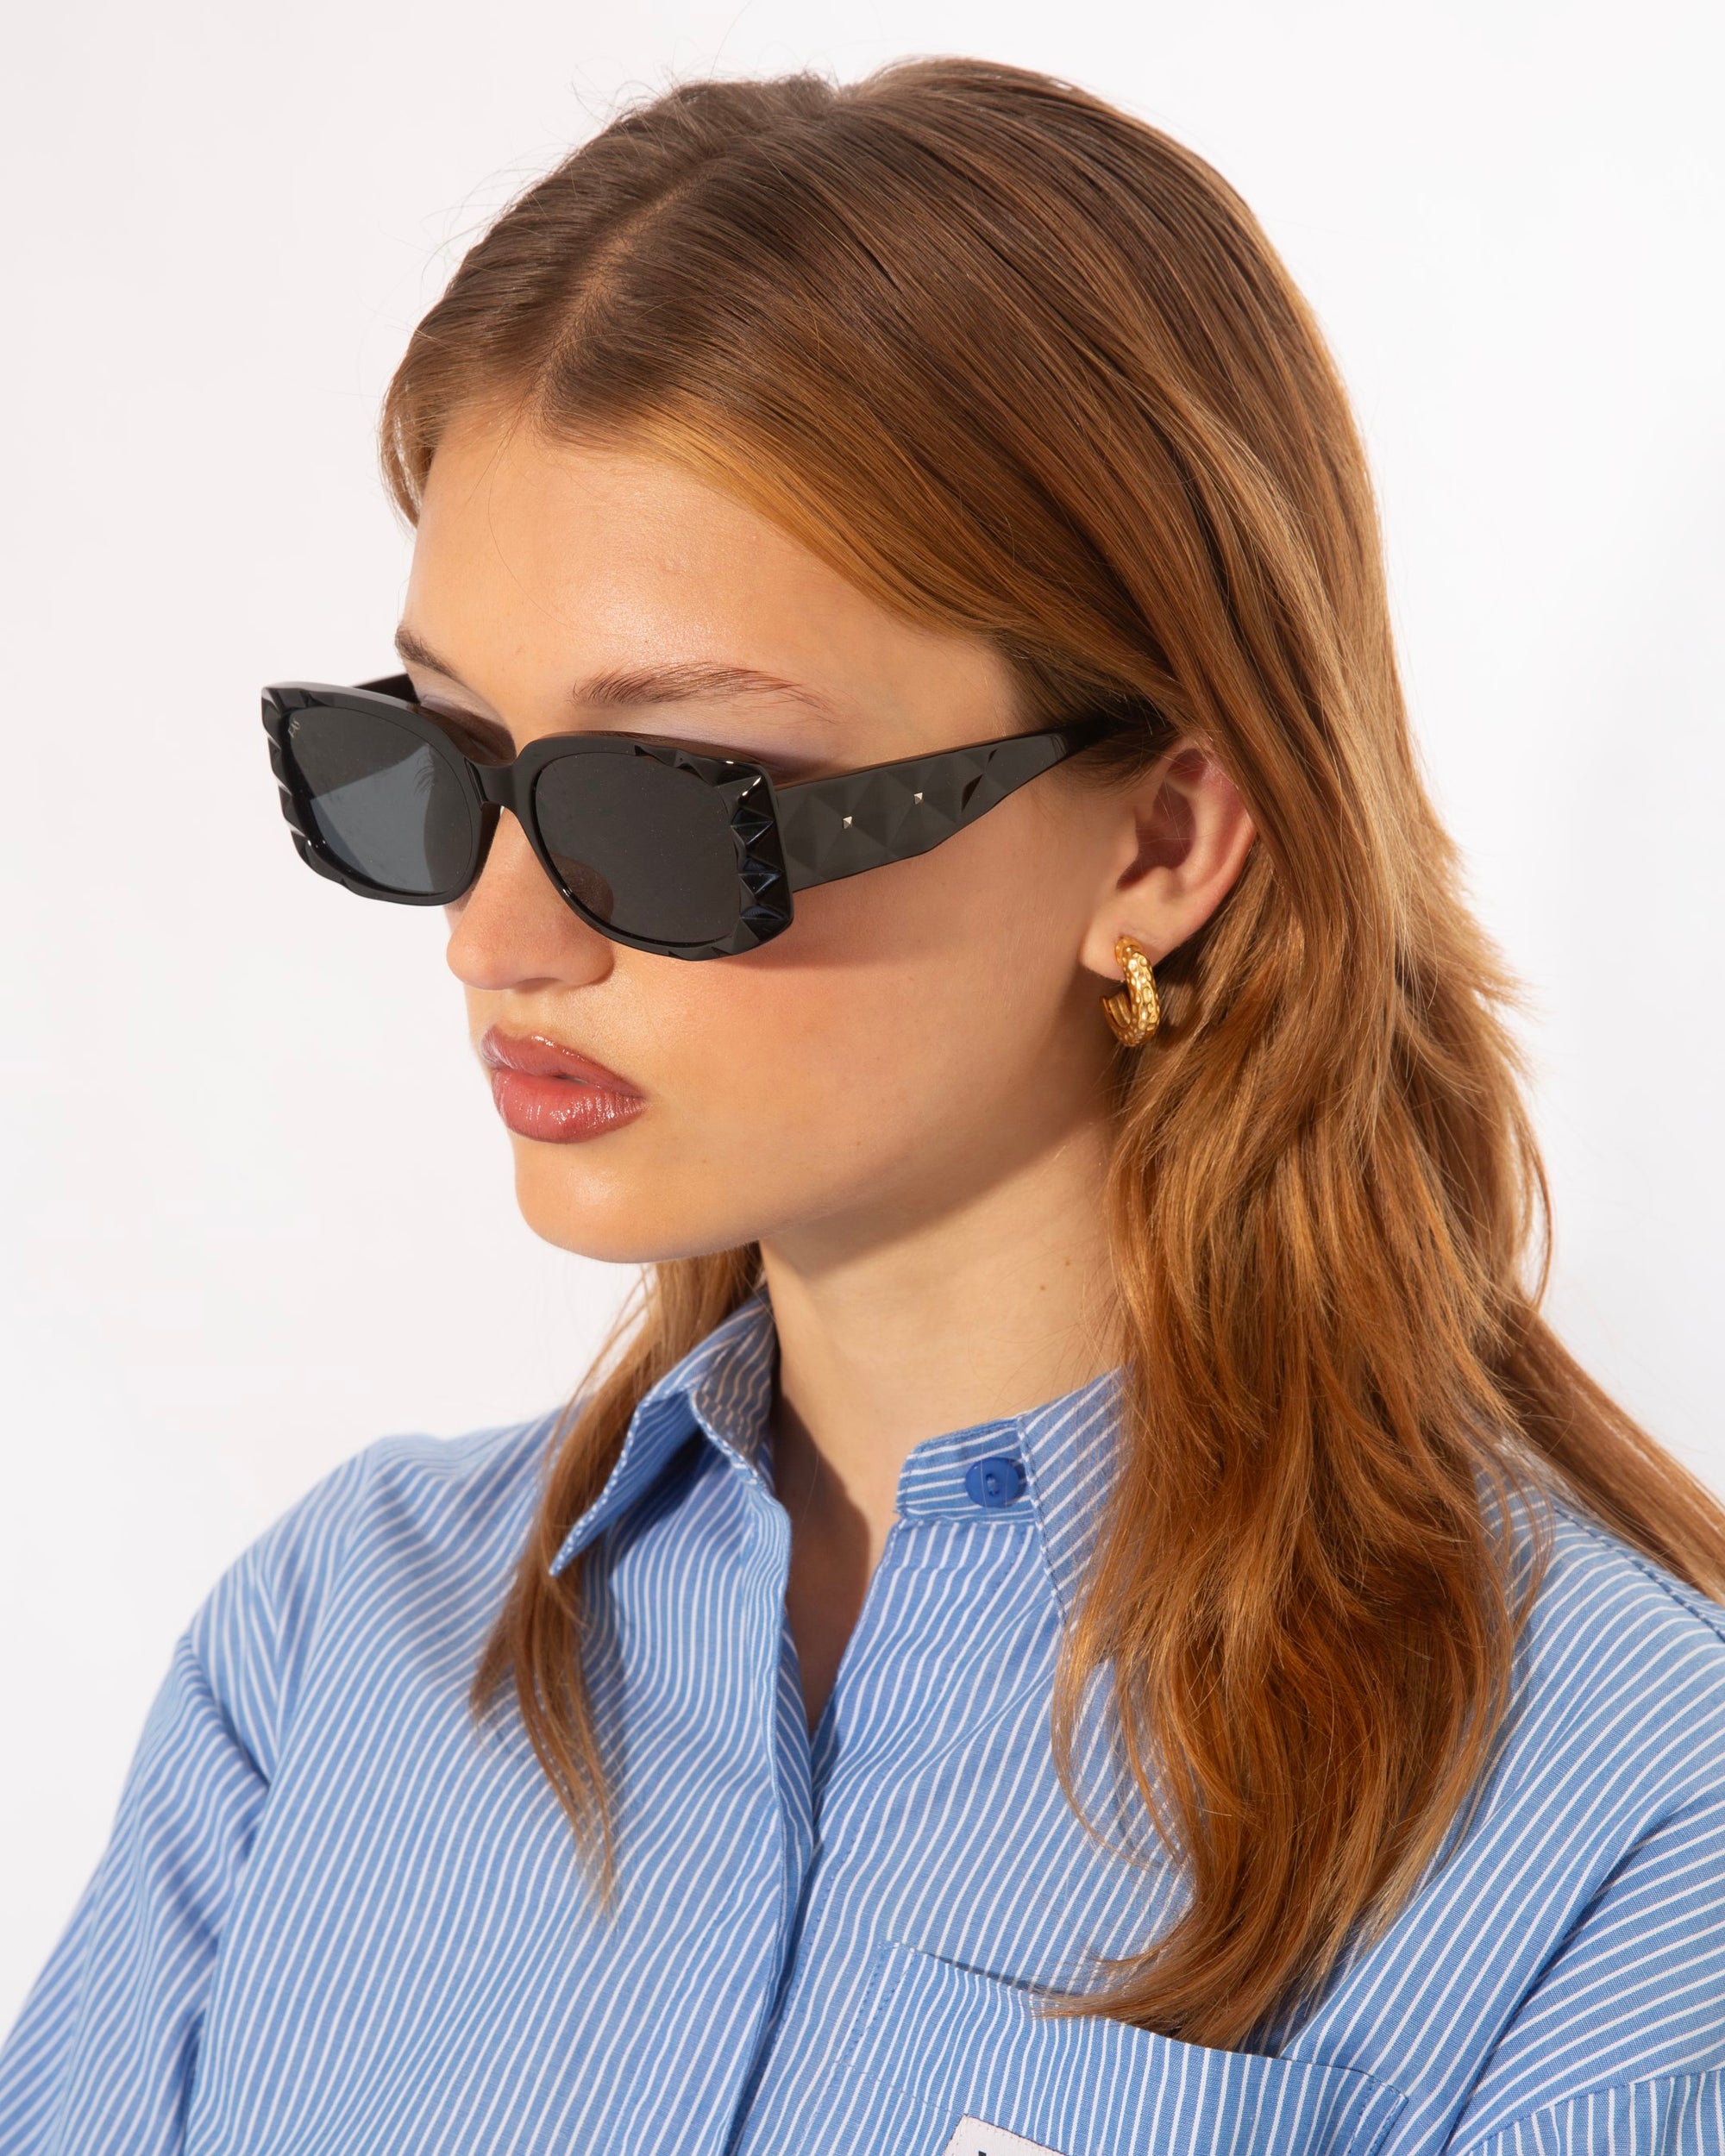 A person with light brown hair wearing black rectangular For Art&#39;s Sake® Cushion sunglasses with Ultra-lightweight Nylon lenses, a blue and white striped button-up shirt, and gold hoop earrings stands in front of a plain white background.